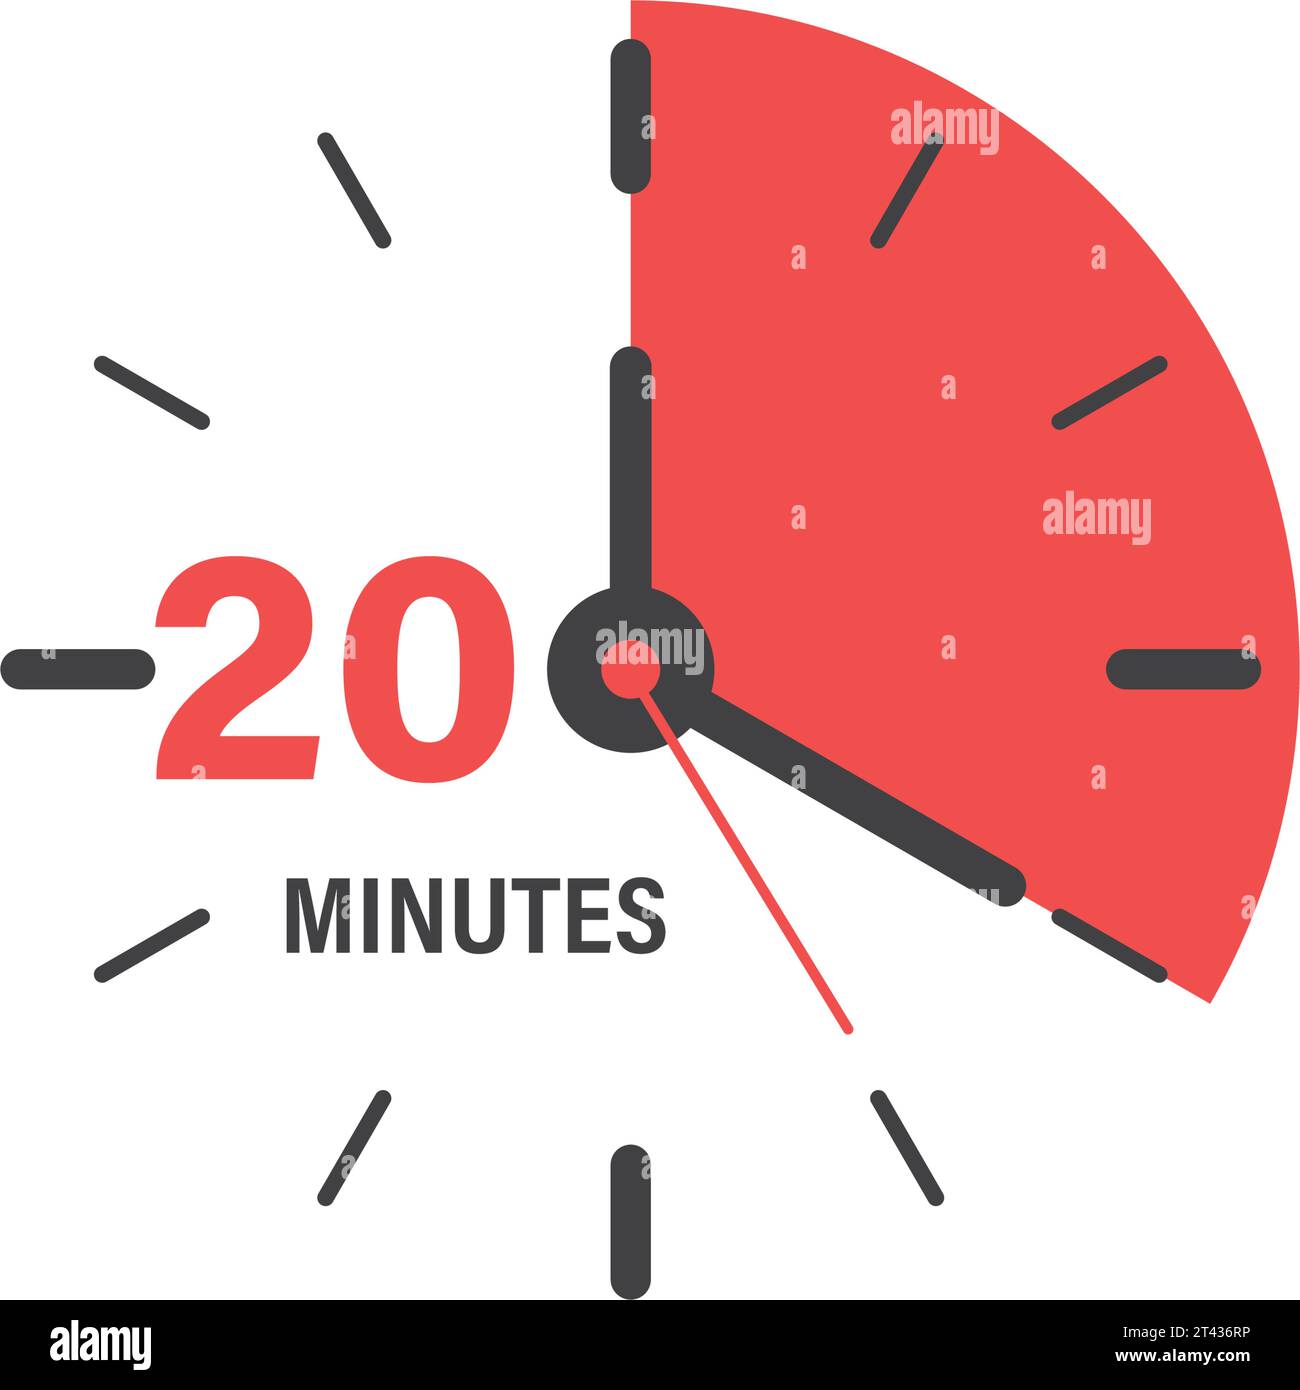 https://c8.alamy.com/comp/2T436RP/20-minutes-on-stopwatch-icon-in-flat-style-clock-face-timer-vector-illustration-on-isolated-background-countdown-sign-business-concept-2T436RP.jpg